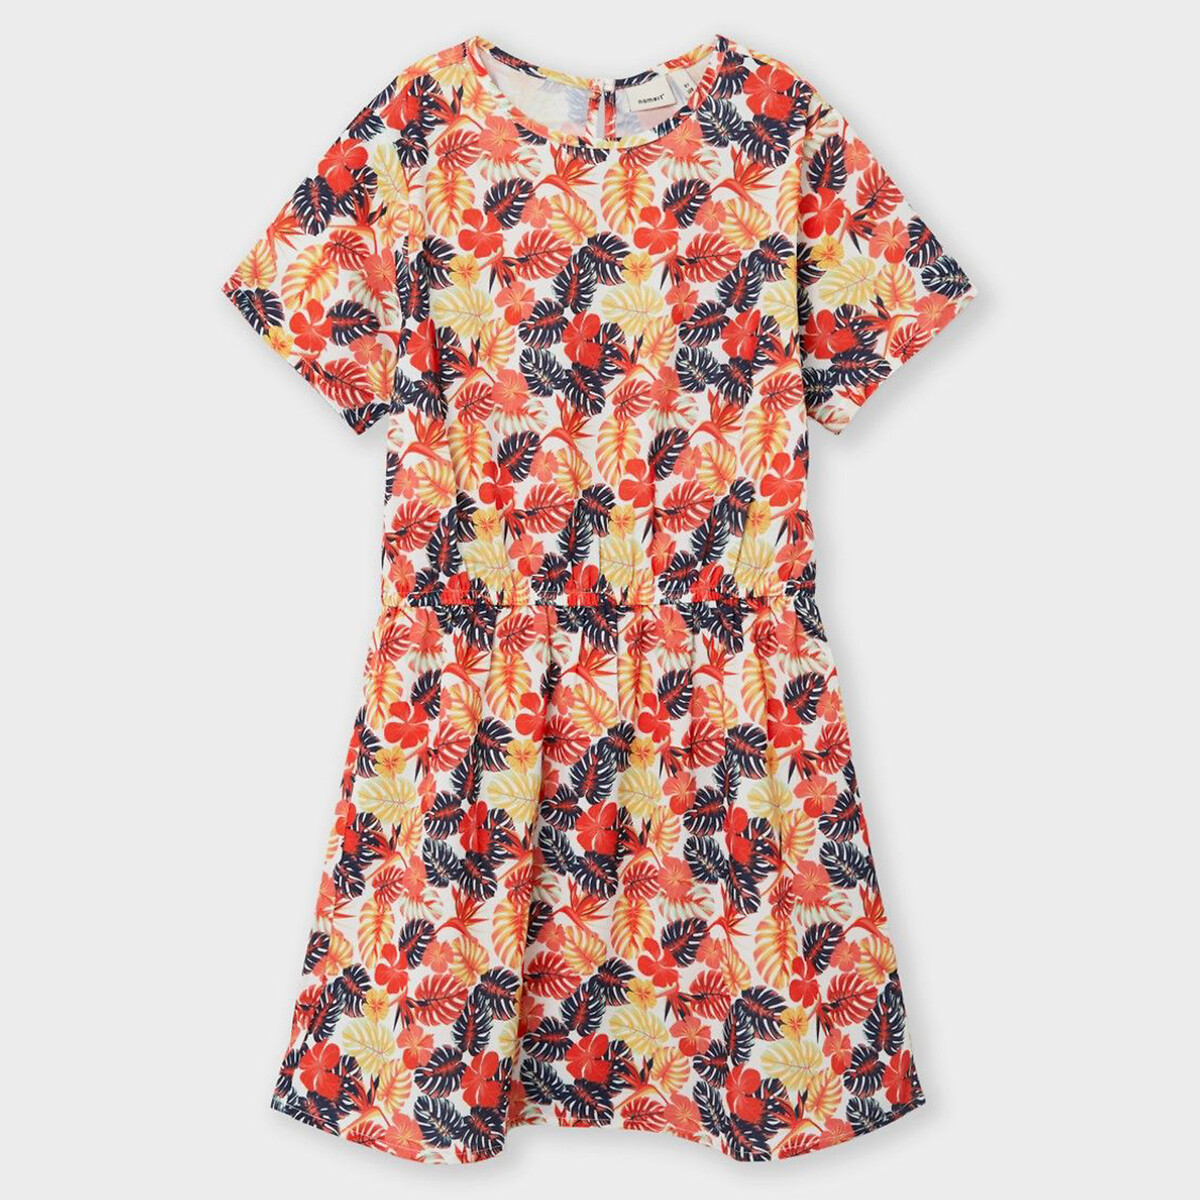 Recycled Floral Print Dress with Short Sleeves